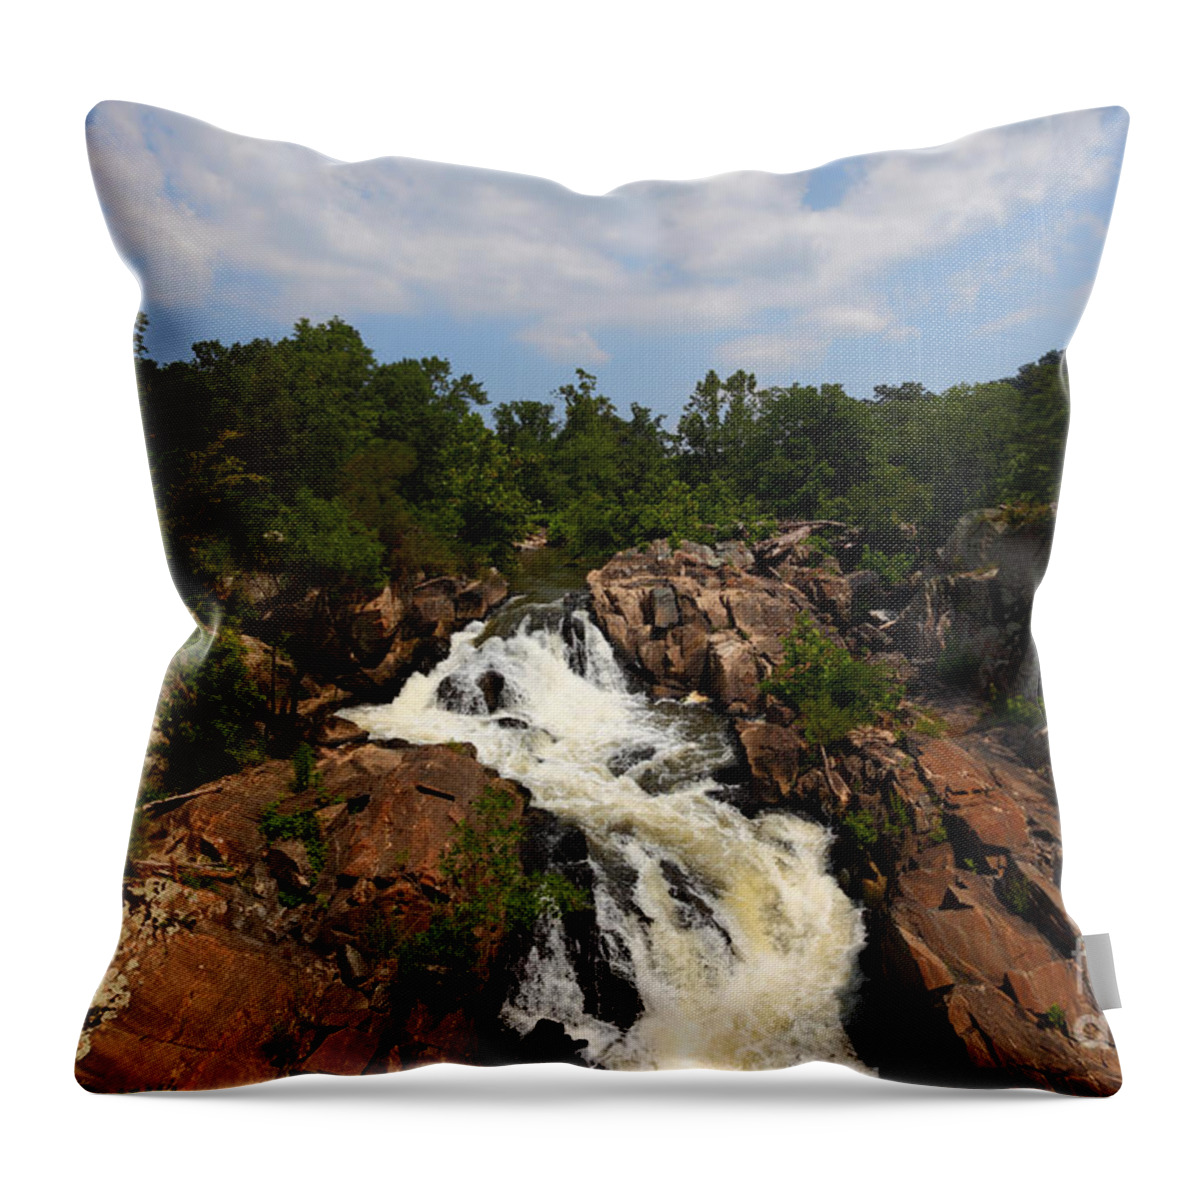 Great Falls Throw Pillow featuring the photograph Potomac River Great Falls by James Brunker